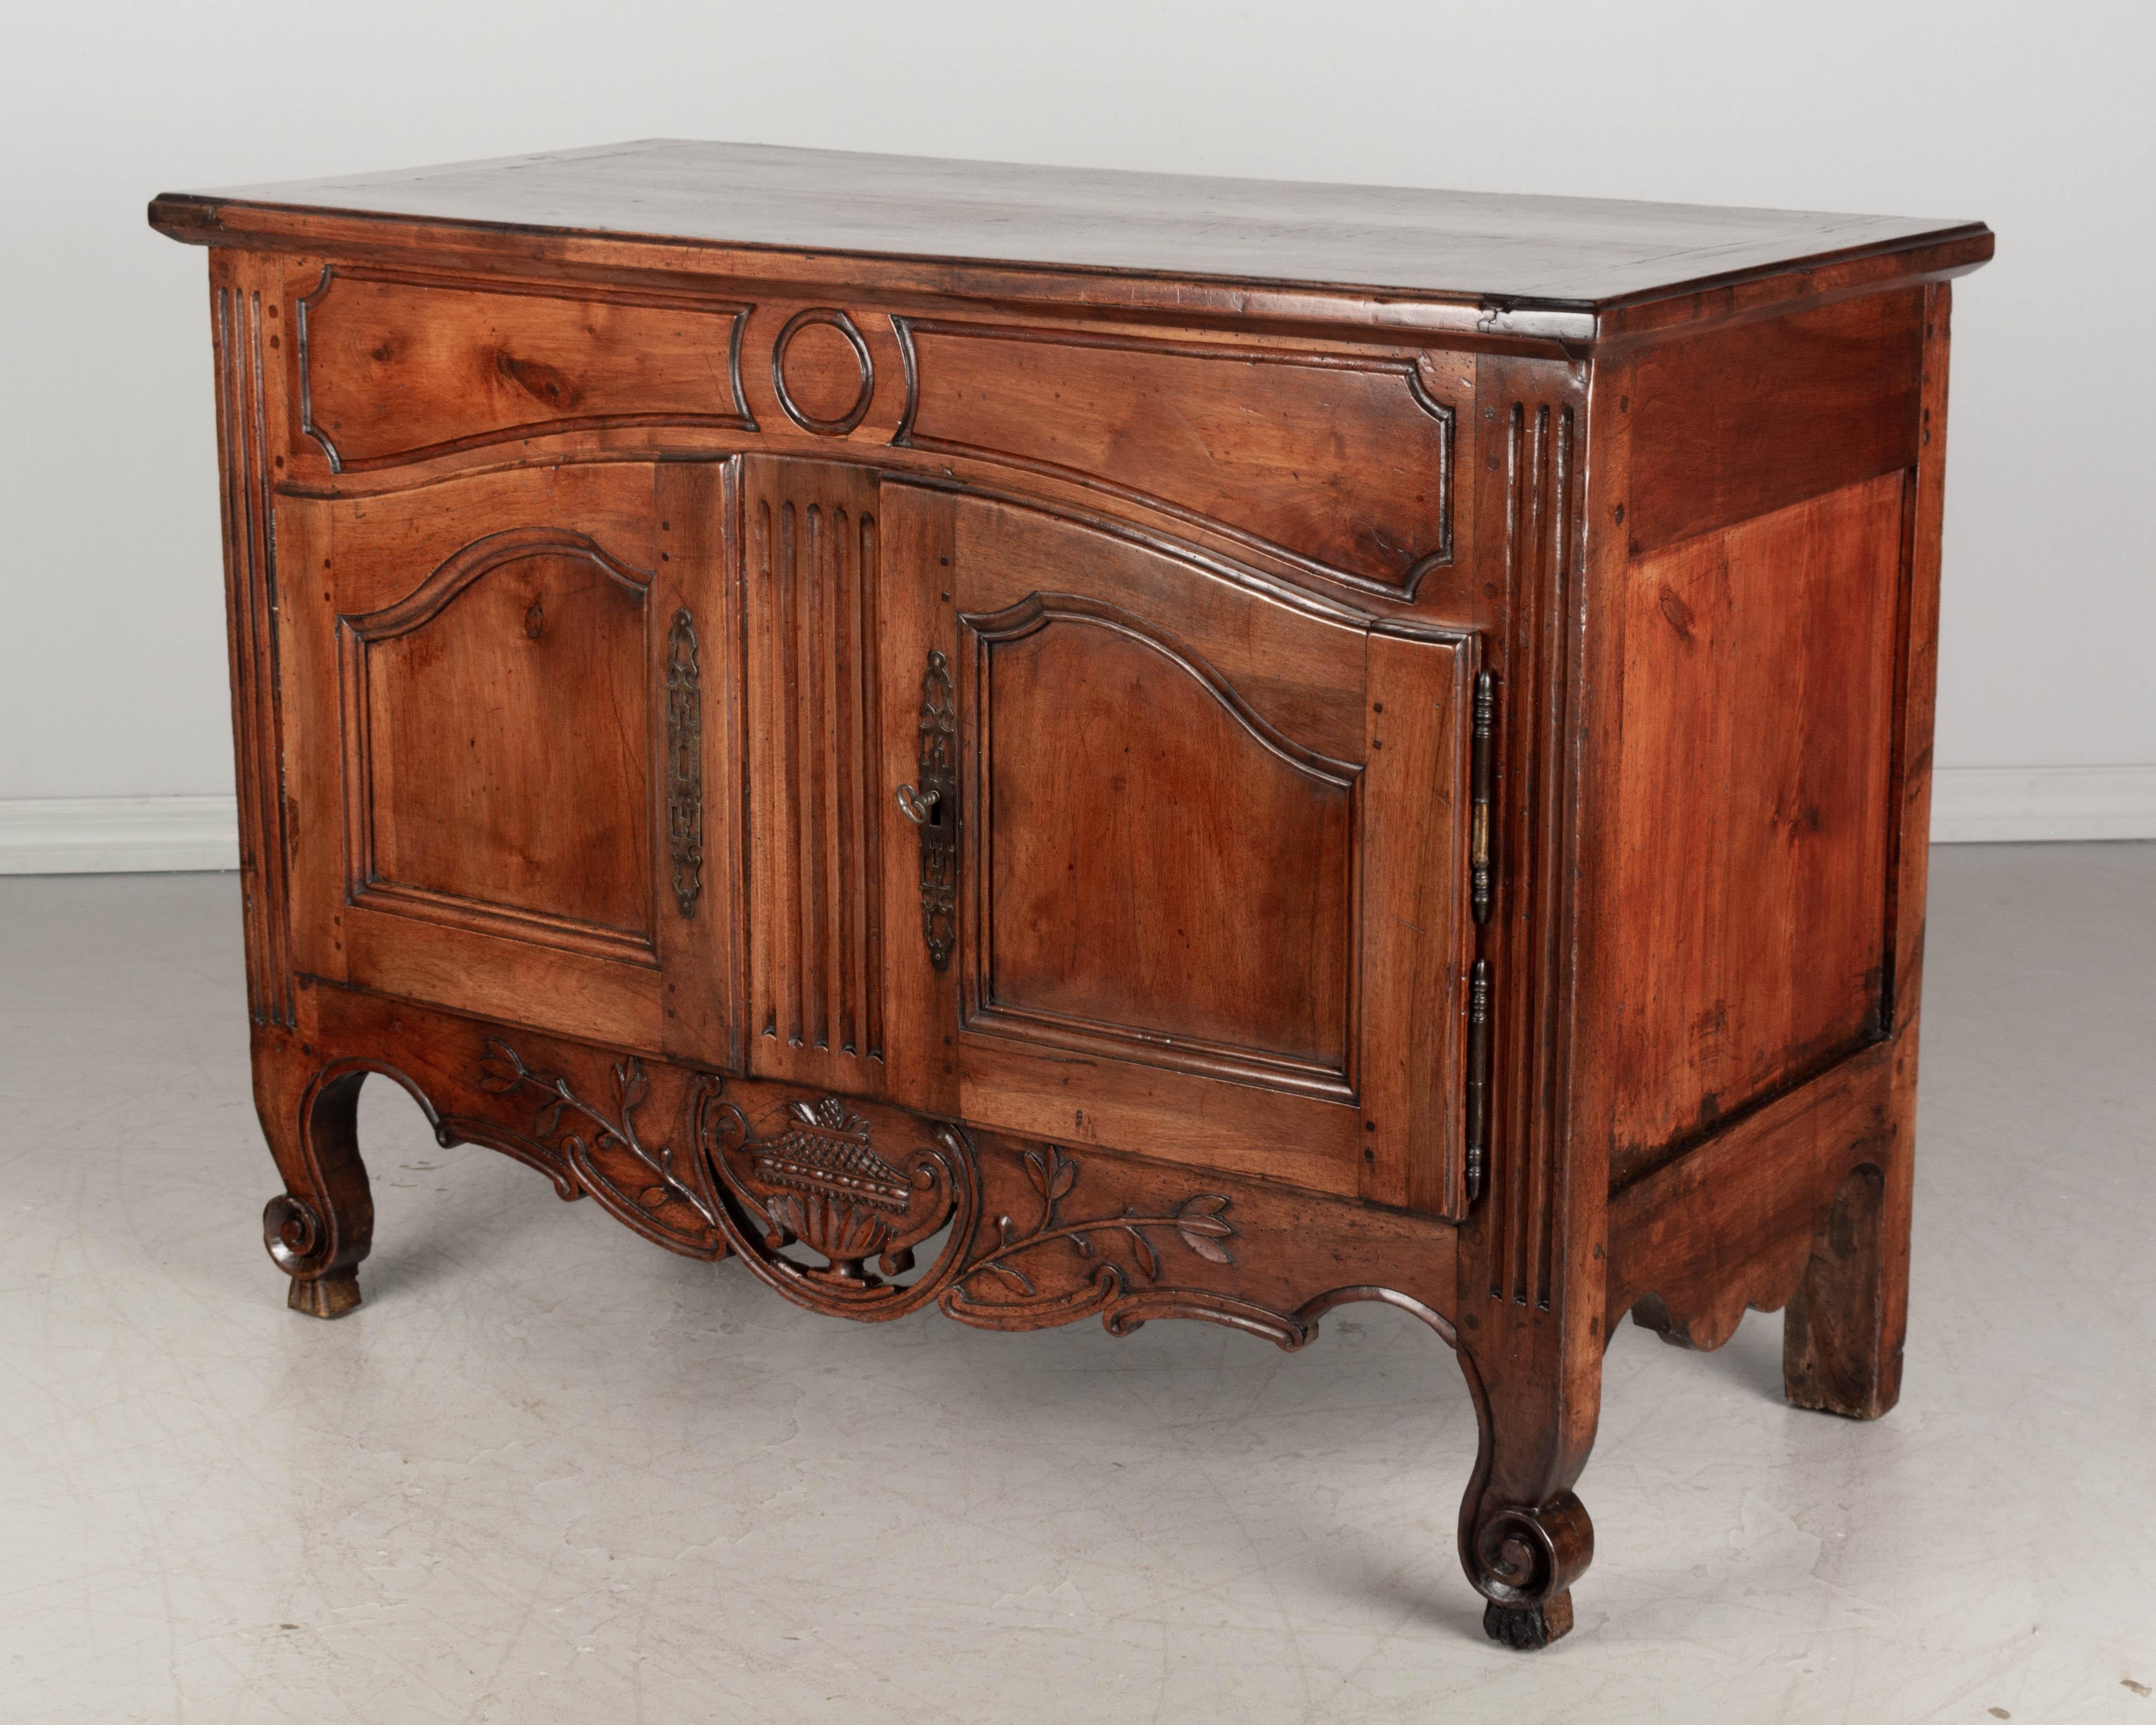 A fine early 19th century Louis XV style Provençal buffet made of solid walnut. Beautiful hand carved pierced apron and large scrolled toes. Good craftsmanship with nice proportions, providing ample storage. This buffet originally held a large dough